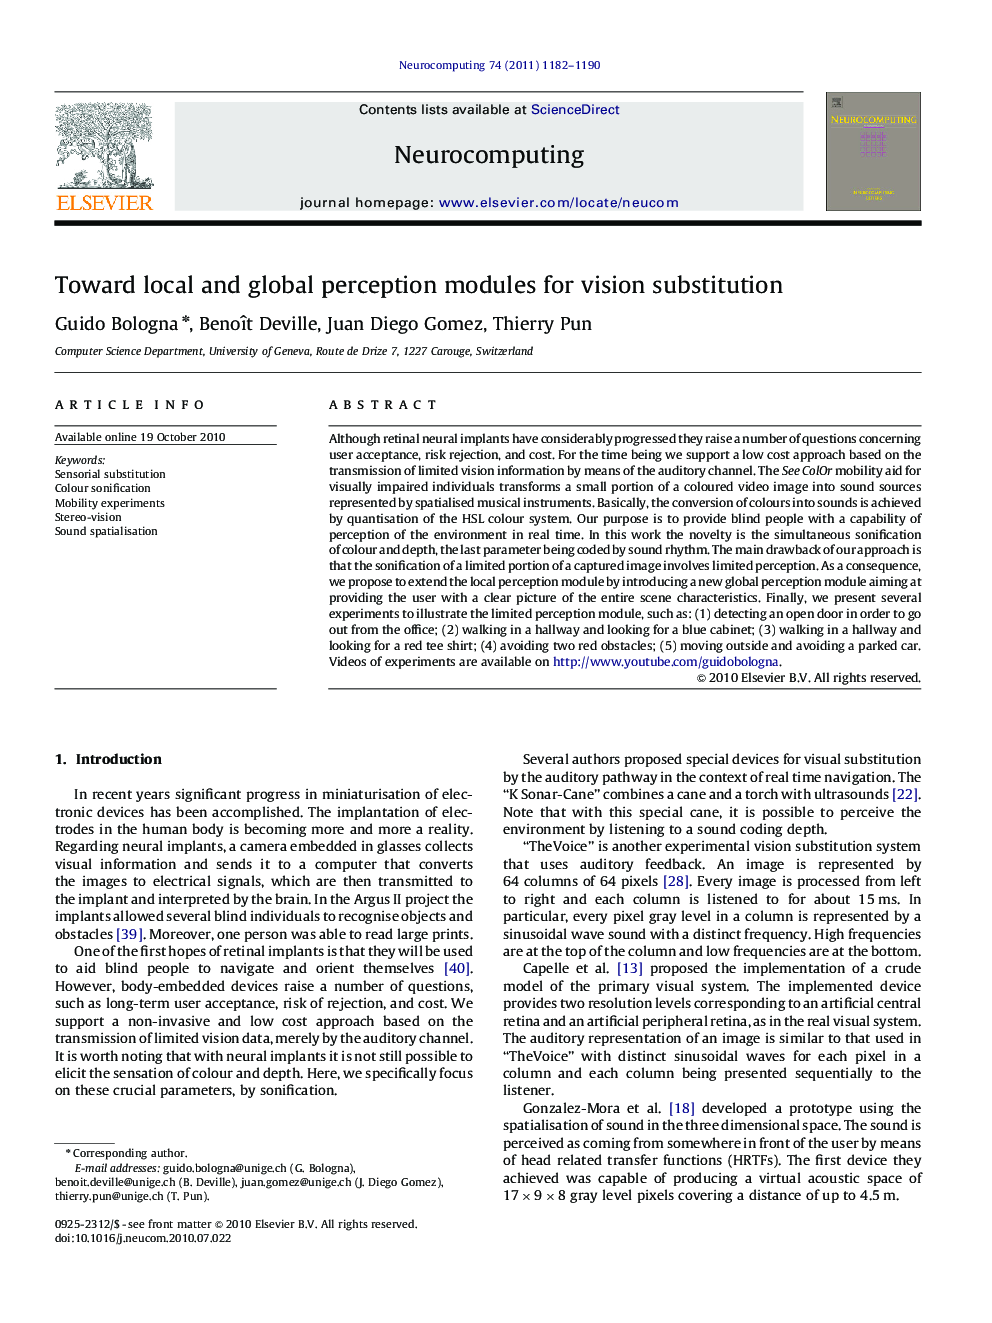 Toward local and global perception modules for vision substitution